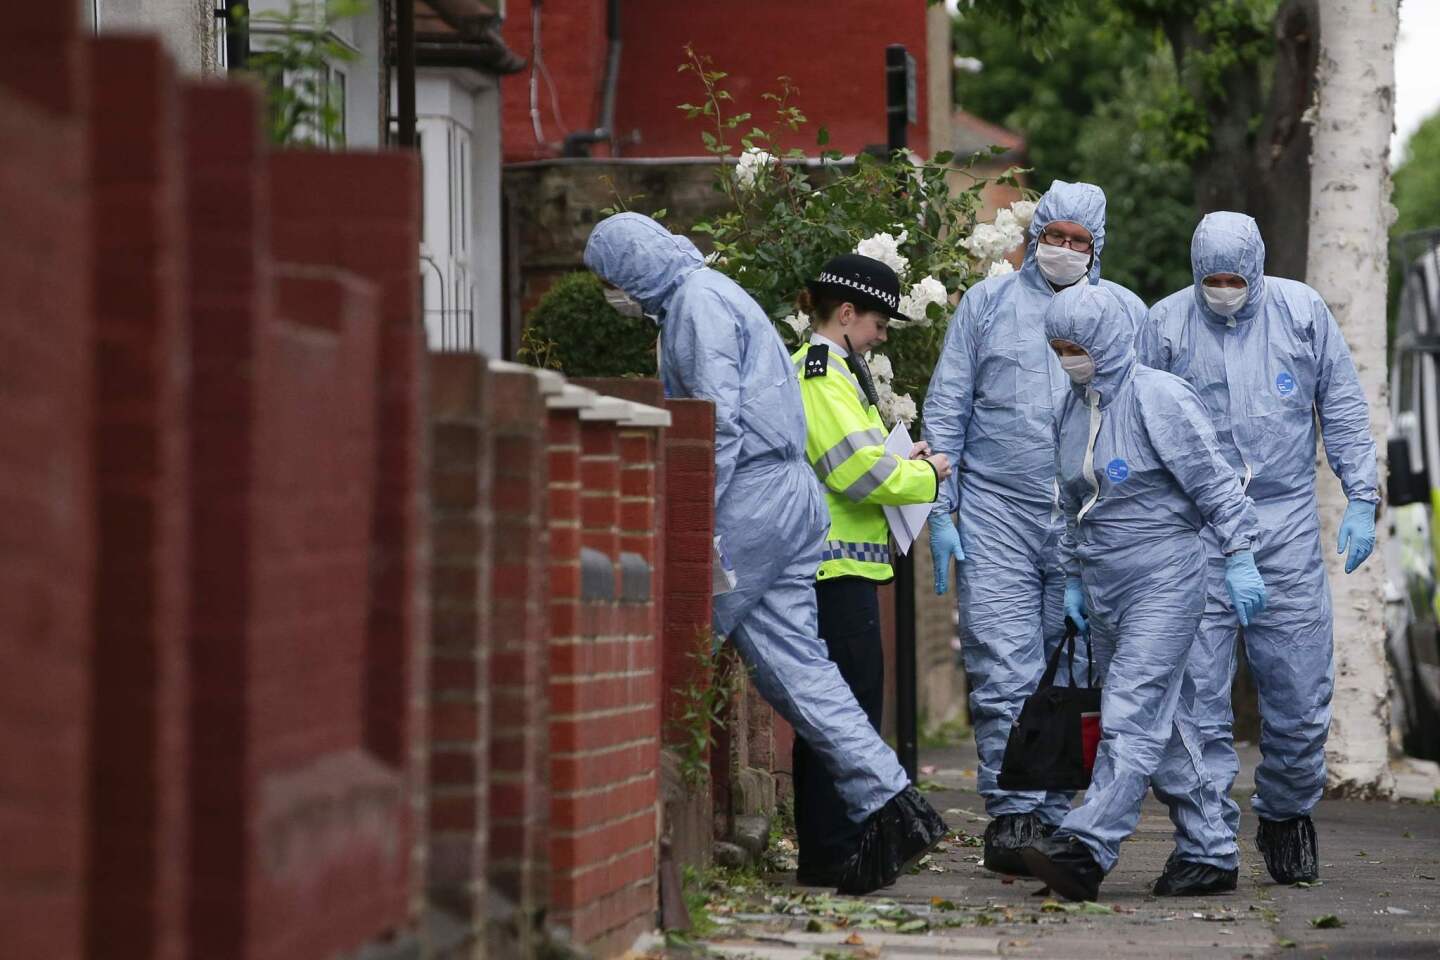 Police forensics officers work at a residential property in east London on Monday as part of their investigations into the terrorist attacks.